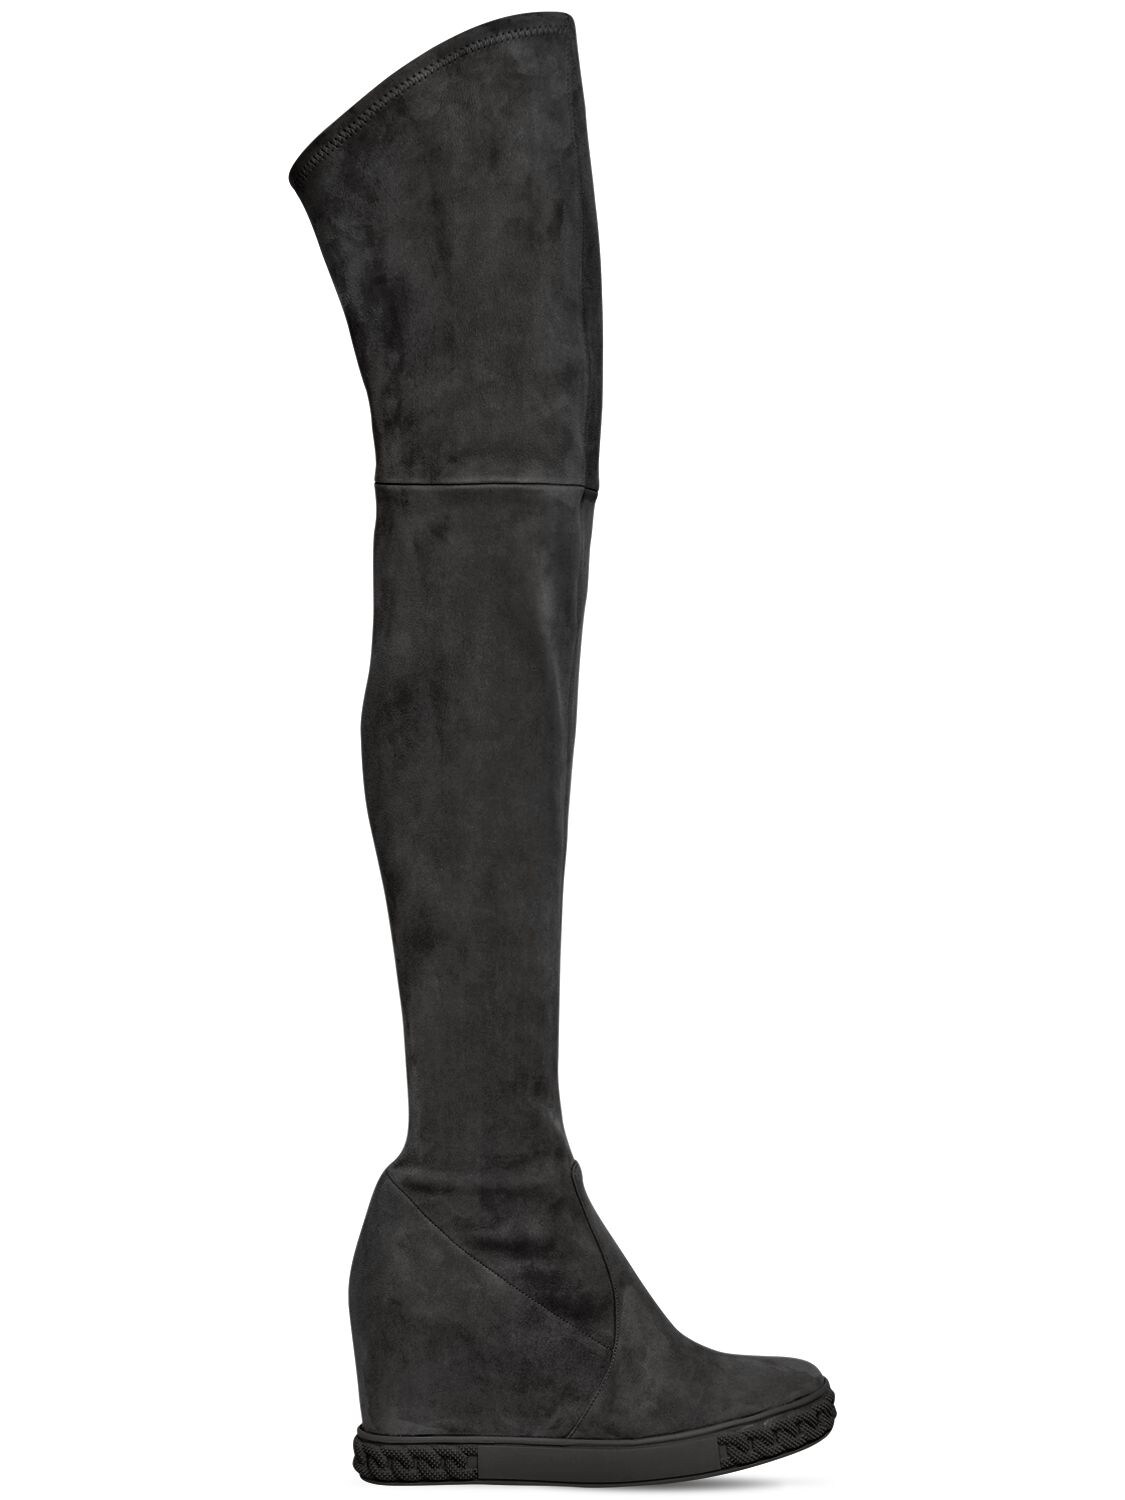 CASADEI 100MM STRETCH SUEDE OVER-THE-KNEE BOOTS,68IAIM007-OTG10